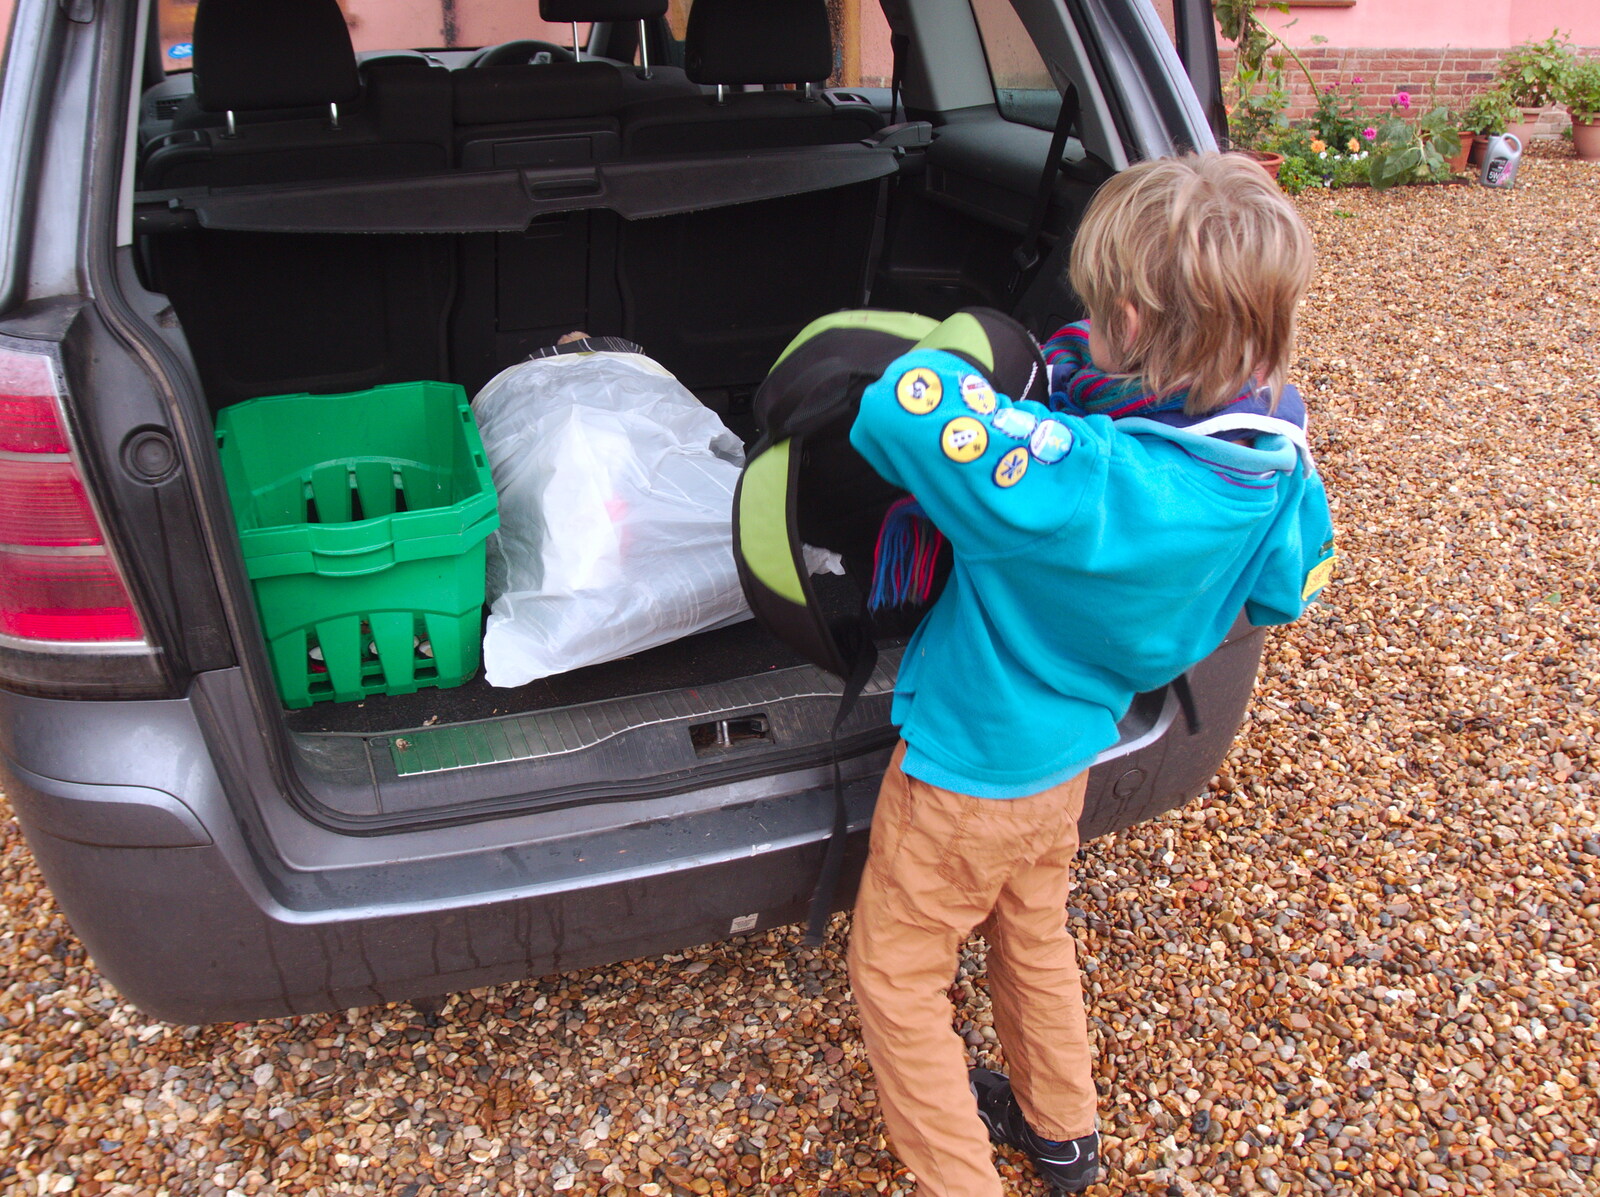 Harry lumps his stuff into the back of the car from The GSB at Stowlangtoft, Beavers, and More XR Rebellions, Suffolk, Norfolk and London - 16th October 2019